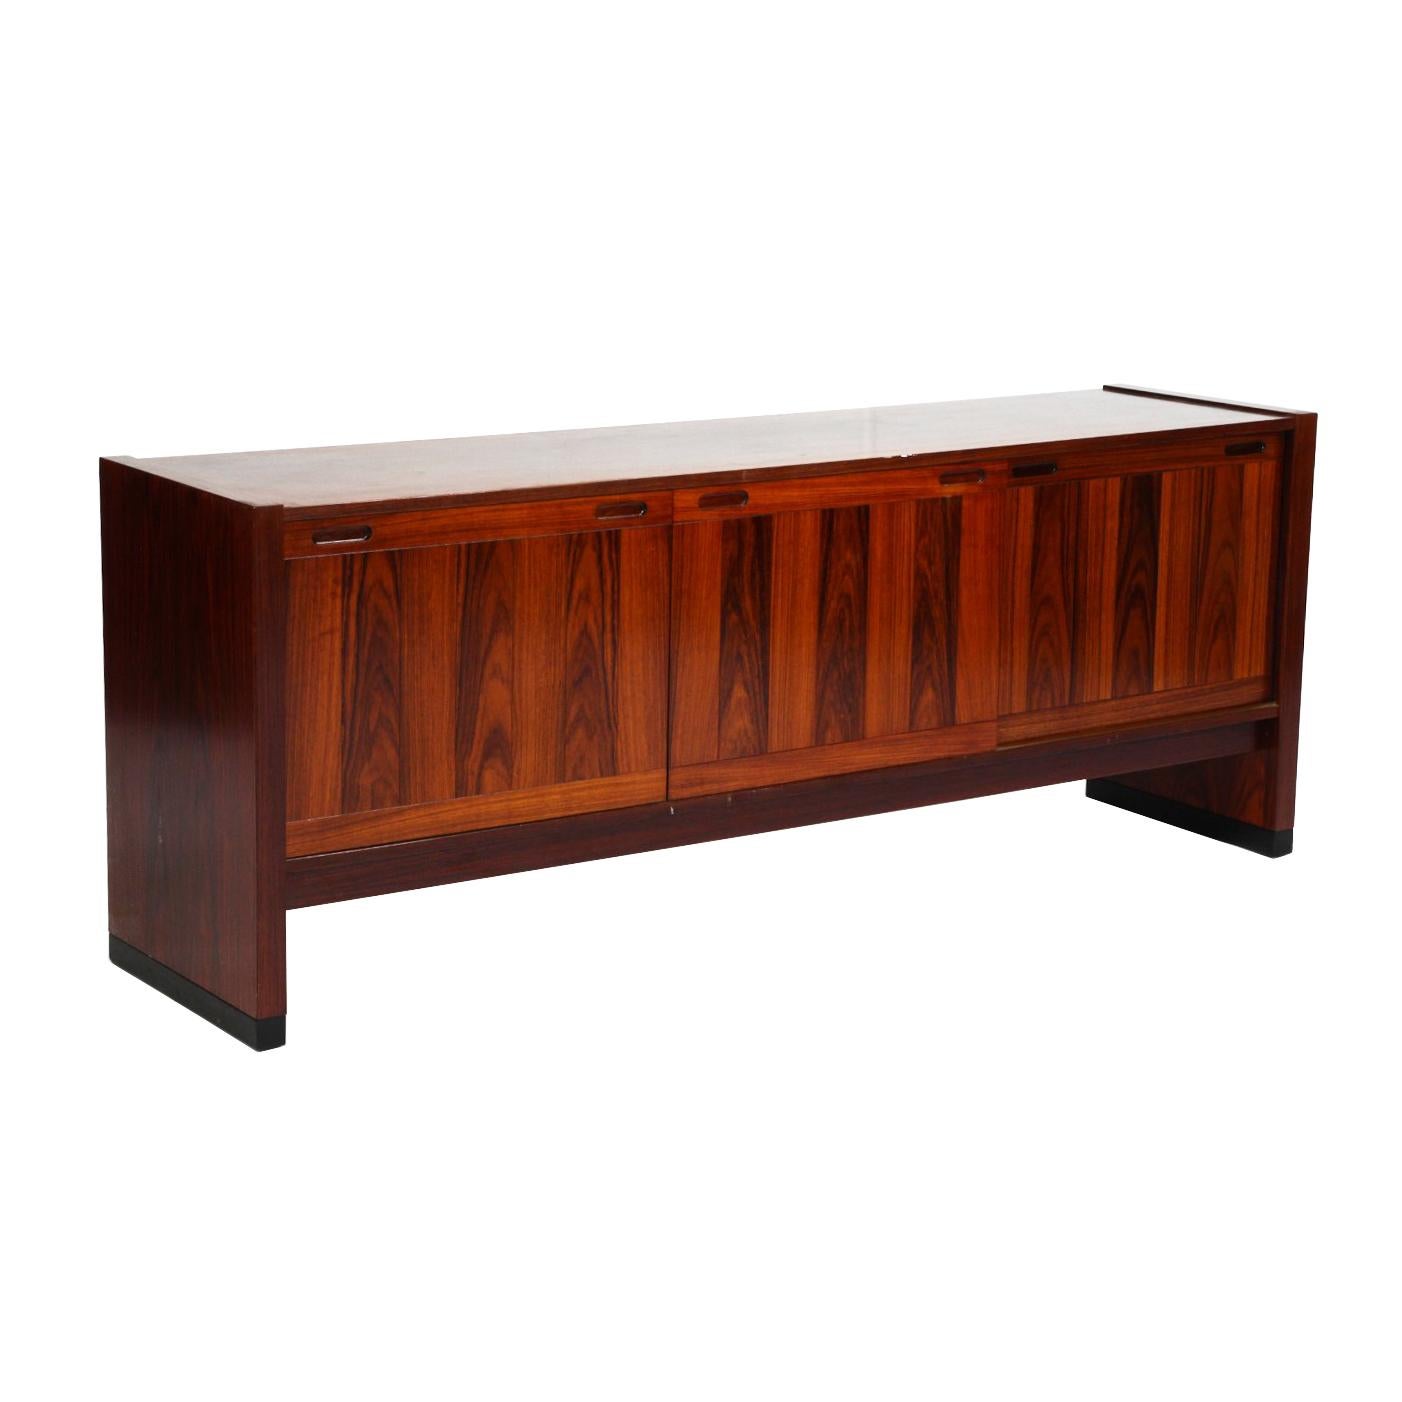 SKovby Rosewood sideboard with three sliding doors. Adjustable shelves and two silverware drawers inside. 

The sideboard is in good condition. However it can be restored professionally to a vintage condition. The piece is restored upon purchase so